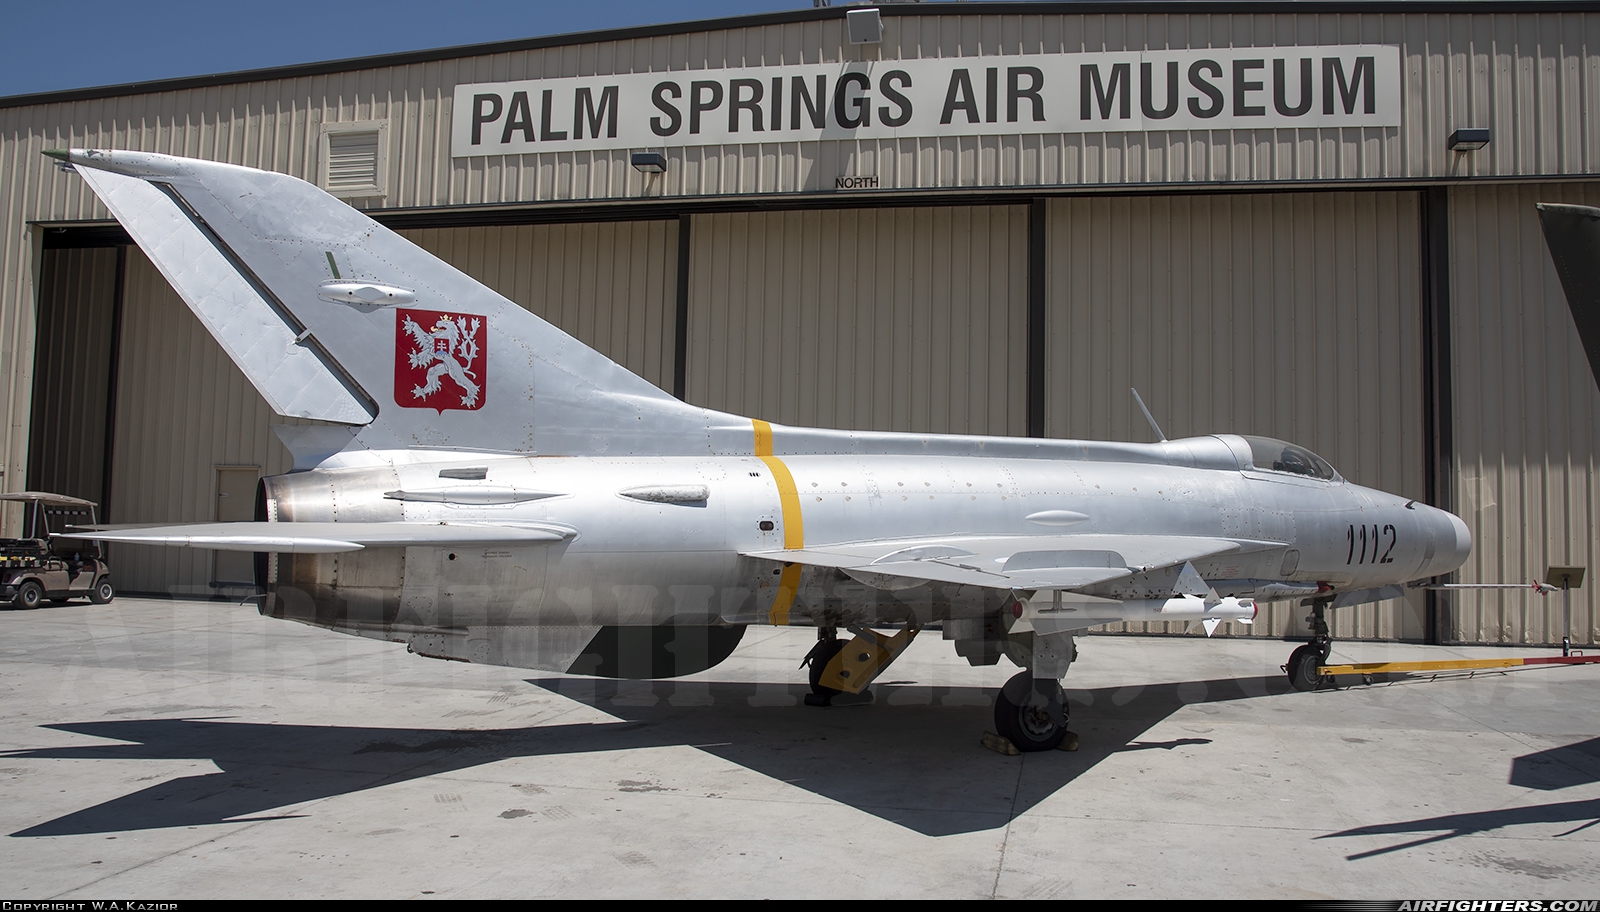 Private - Palm Springs Air Museum Mikoyan-Gurevich MiG-21F-13 1112 at Palm Springs / Thermal - Jacqueline Cochran Regional Airport (TRM), USA